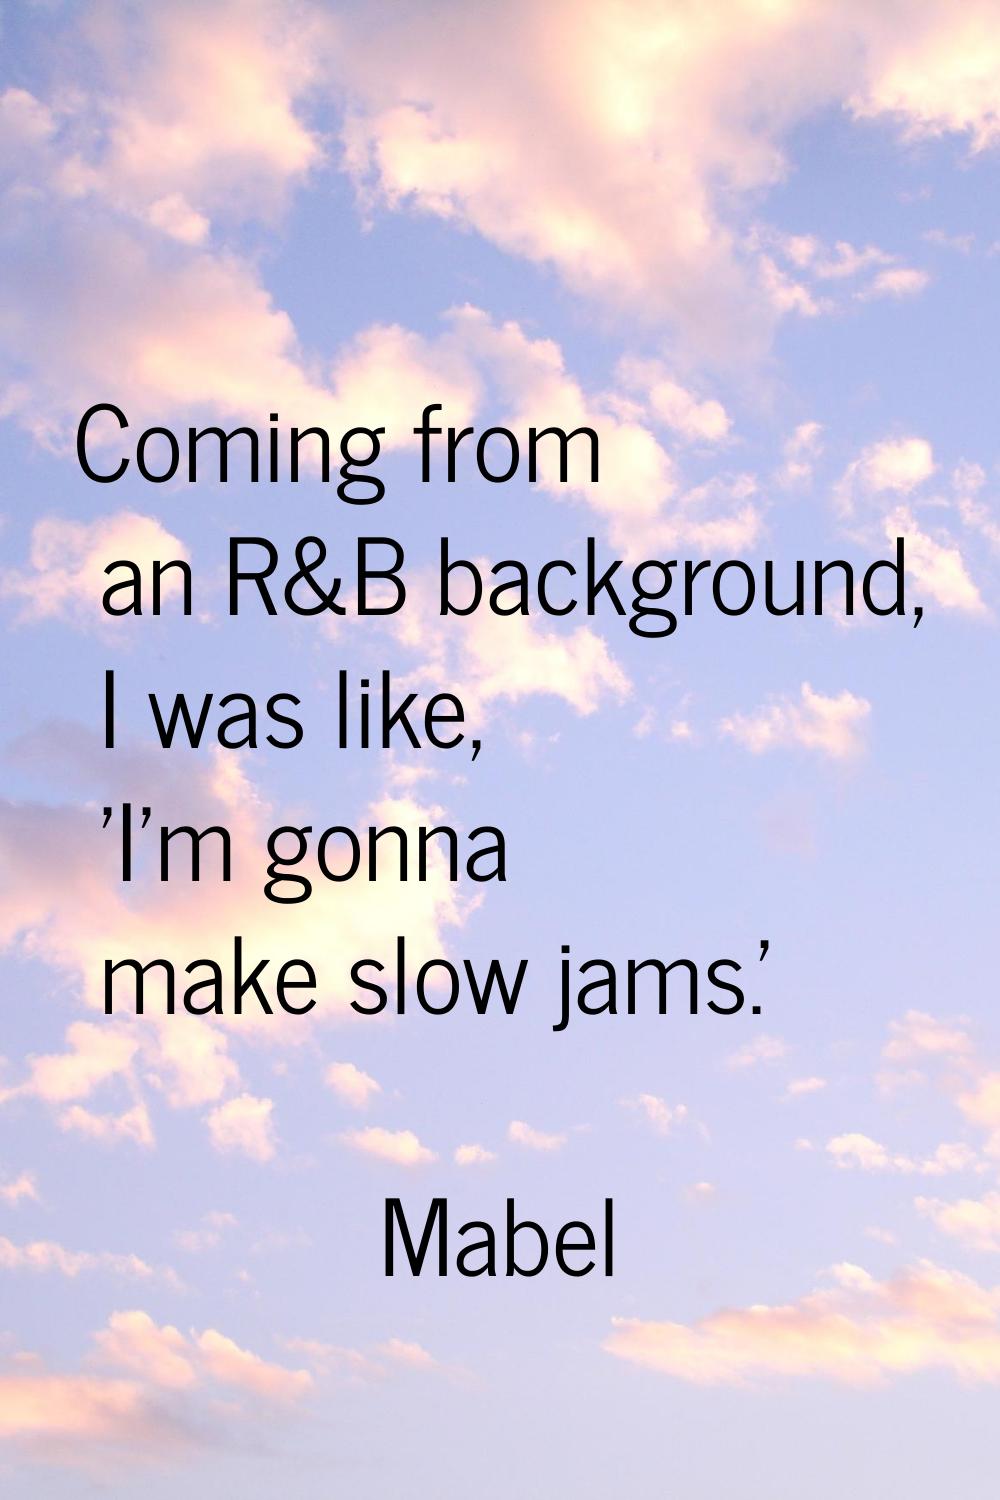 Coming from an R&B background, I was like, 'I'm gonna make slow jams.'